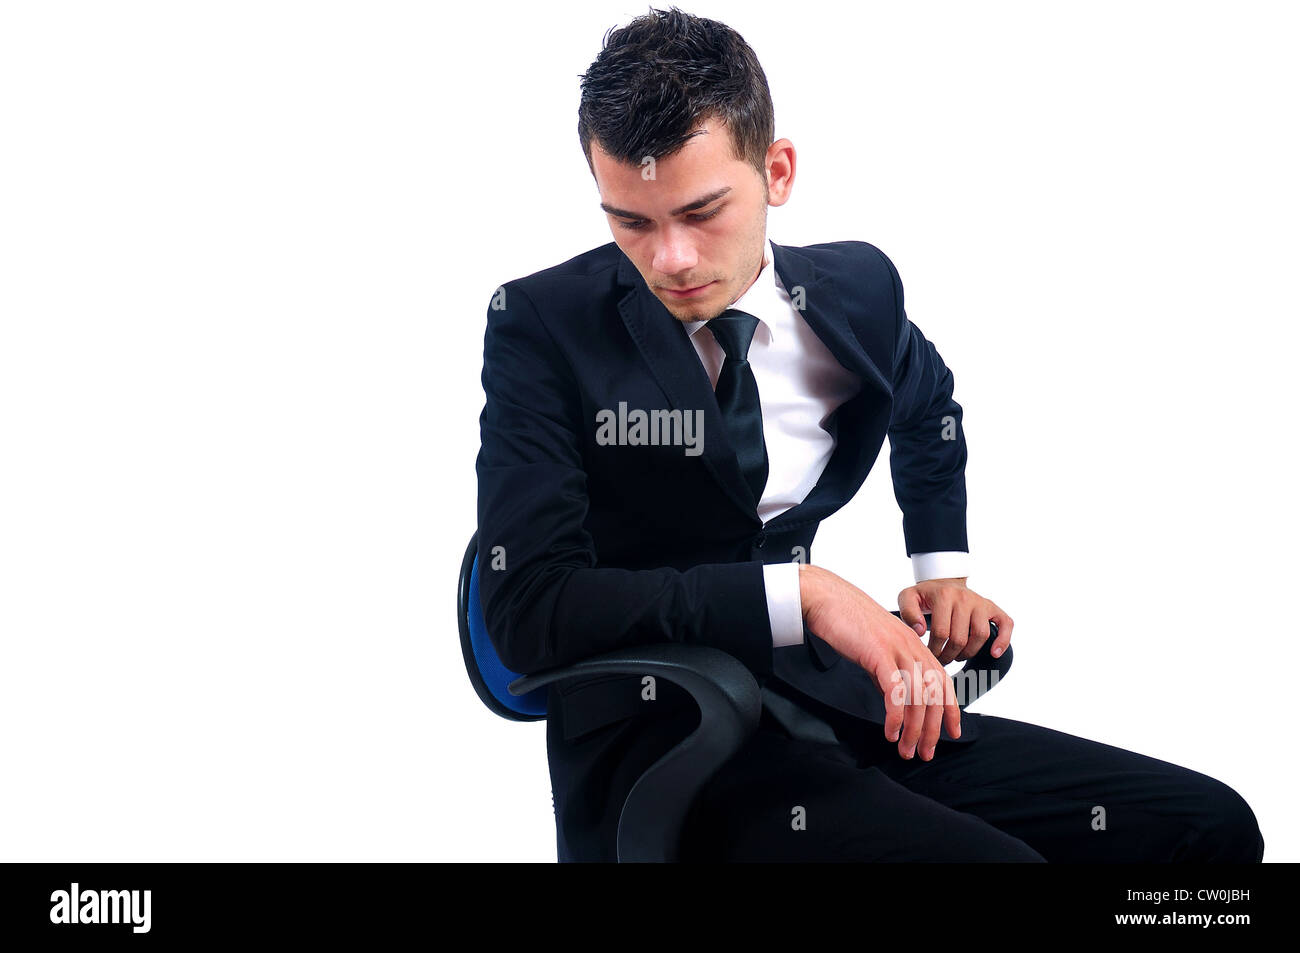 Isolated young business man sitting on chair Stock Photo